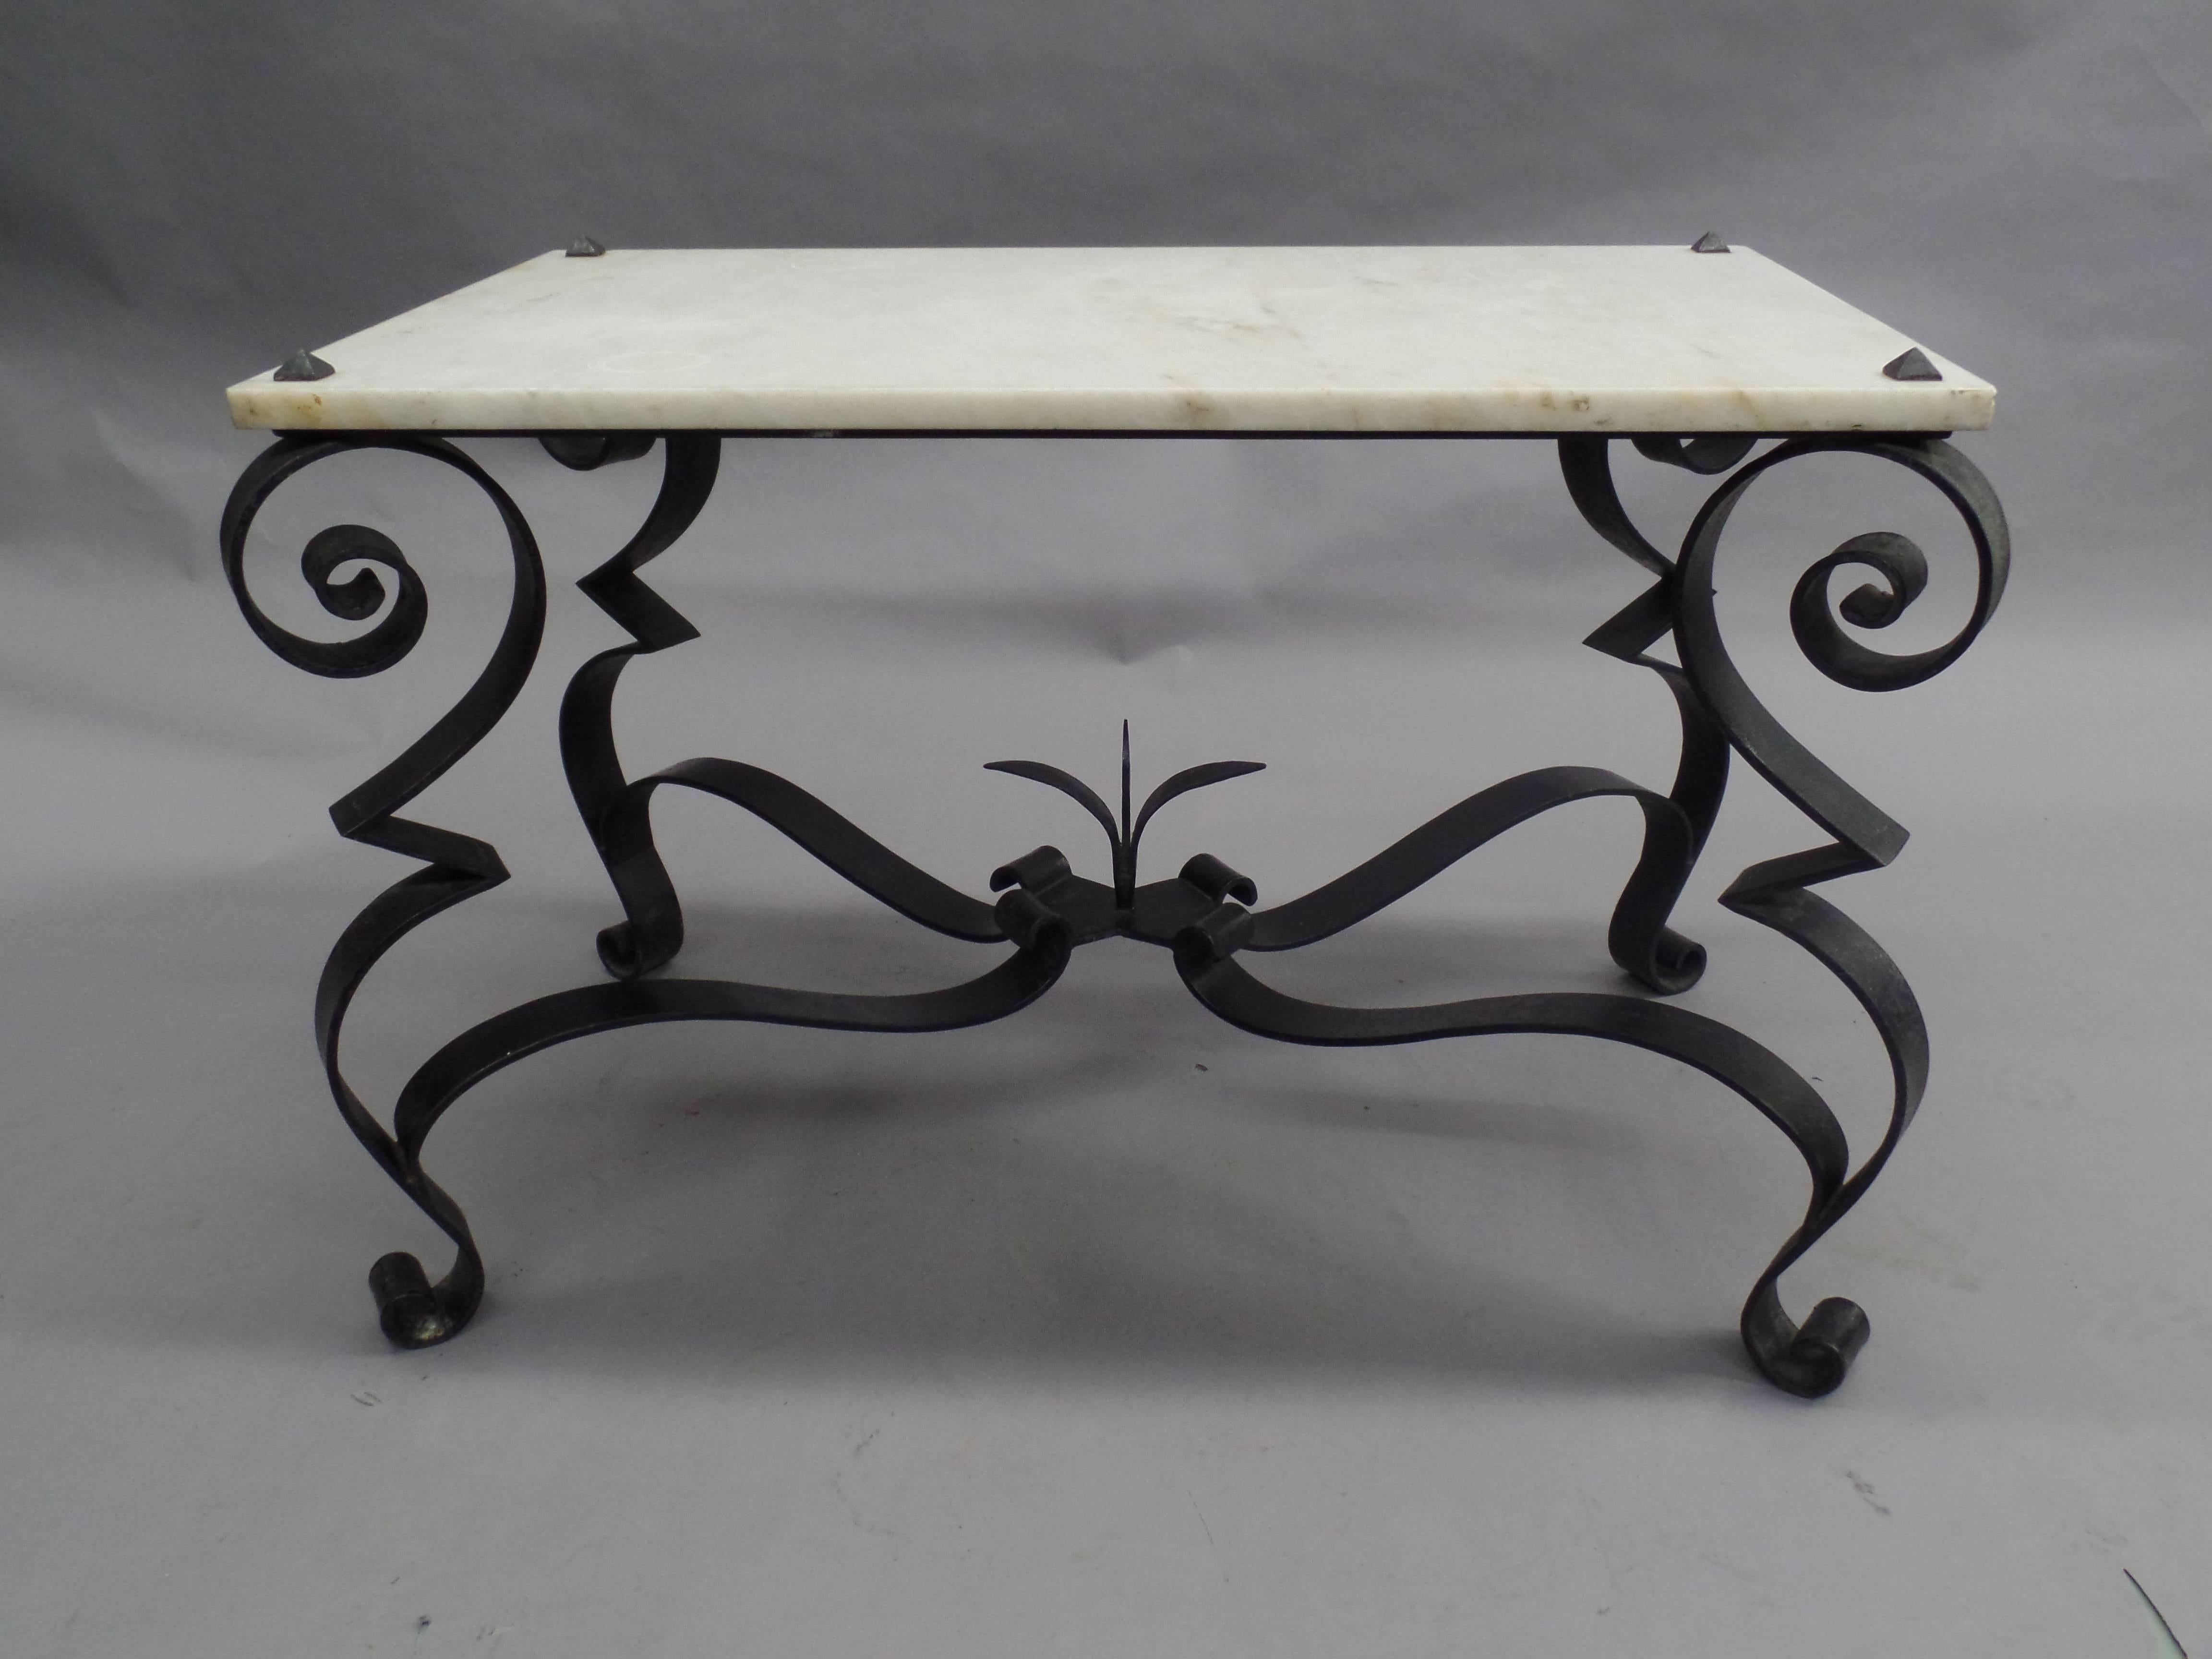 A Classic French Mid-century hand wrought iron coffee table / side or end table in the Modern Neo-Baroque style with a white marble top. The hand wrought iron is curved and spiraling at the foot and base of each leg; each leg is united by stretchers